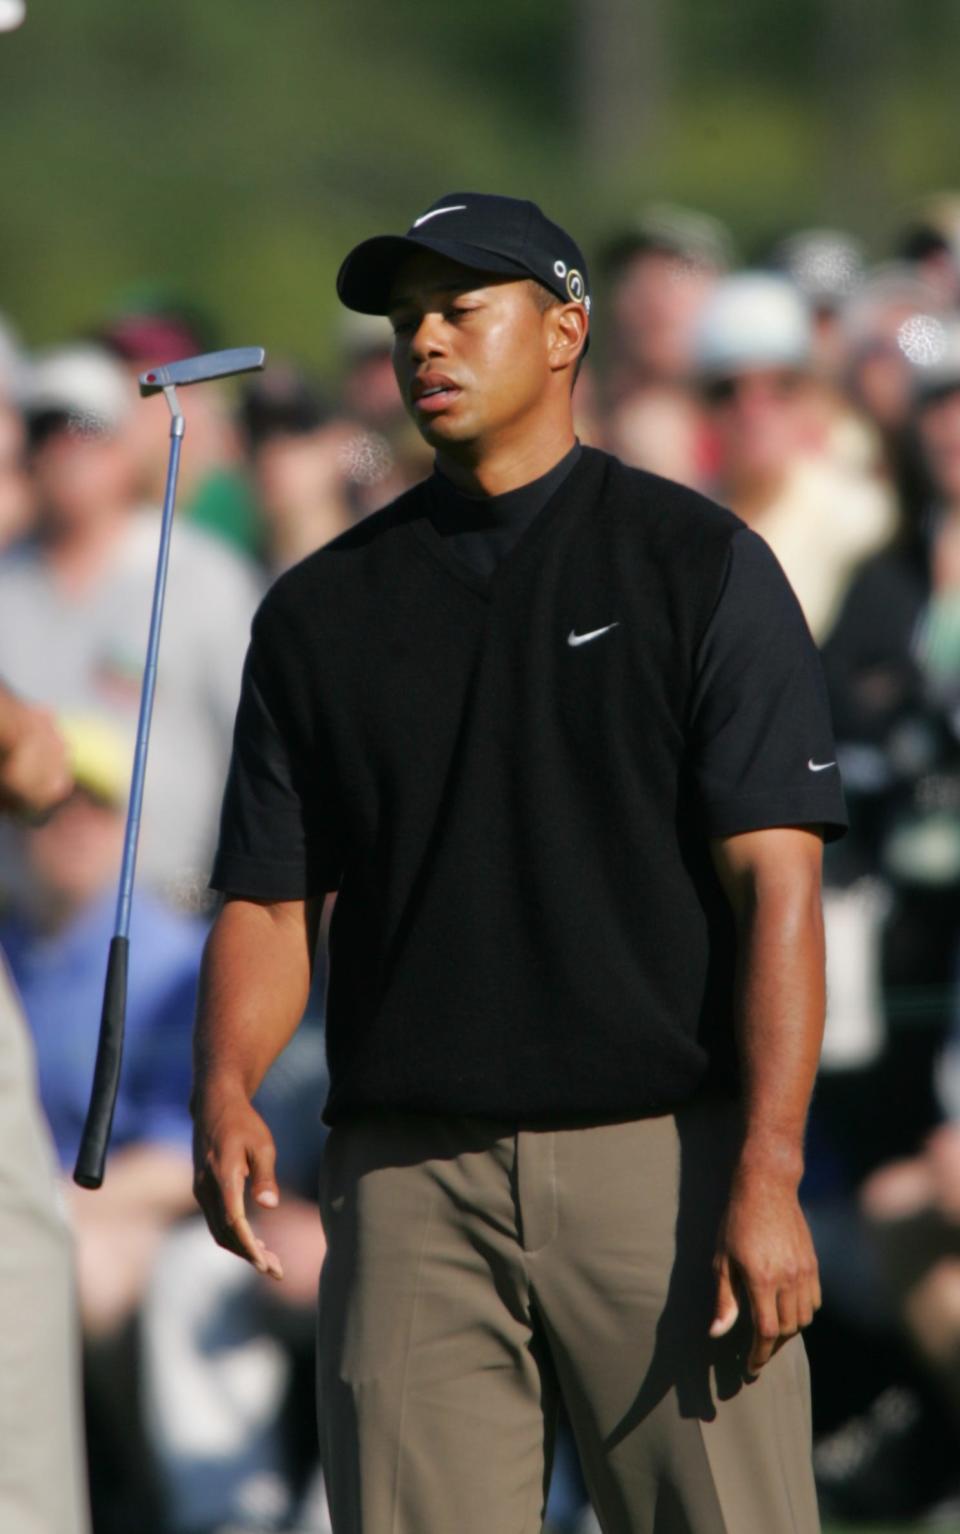 Tiger Woods misses a putt on 17 and throws his putter April 10, 2005. After the third round, completed Sunday morning, Woods was alone in first place by three strokes over Chris DiMarco.